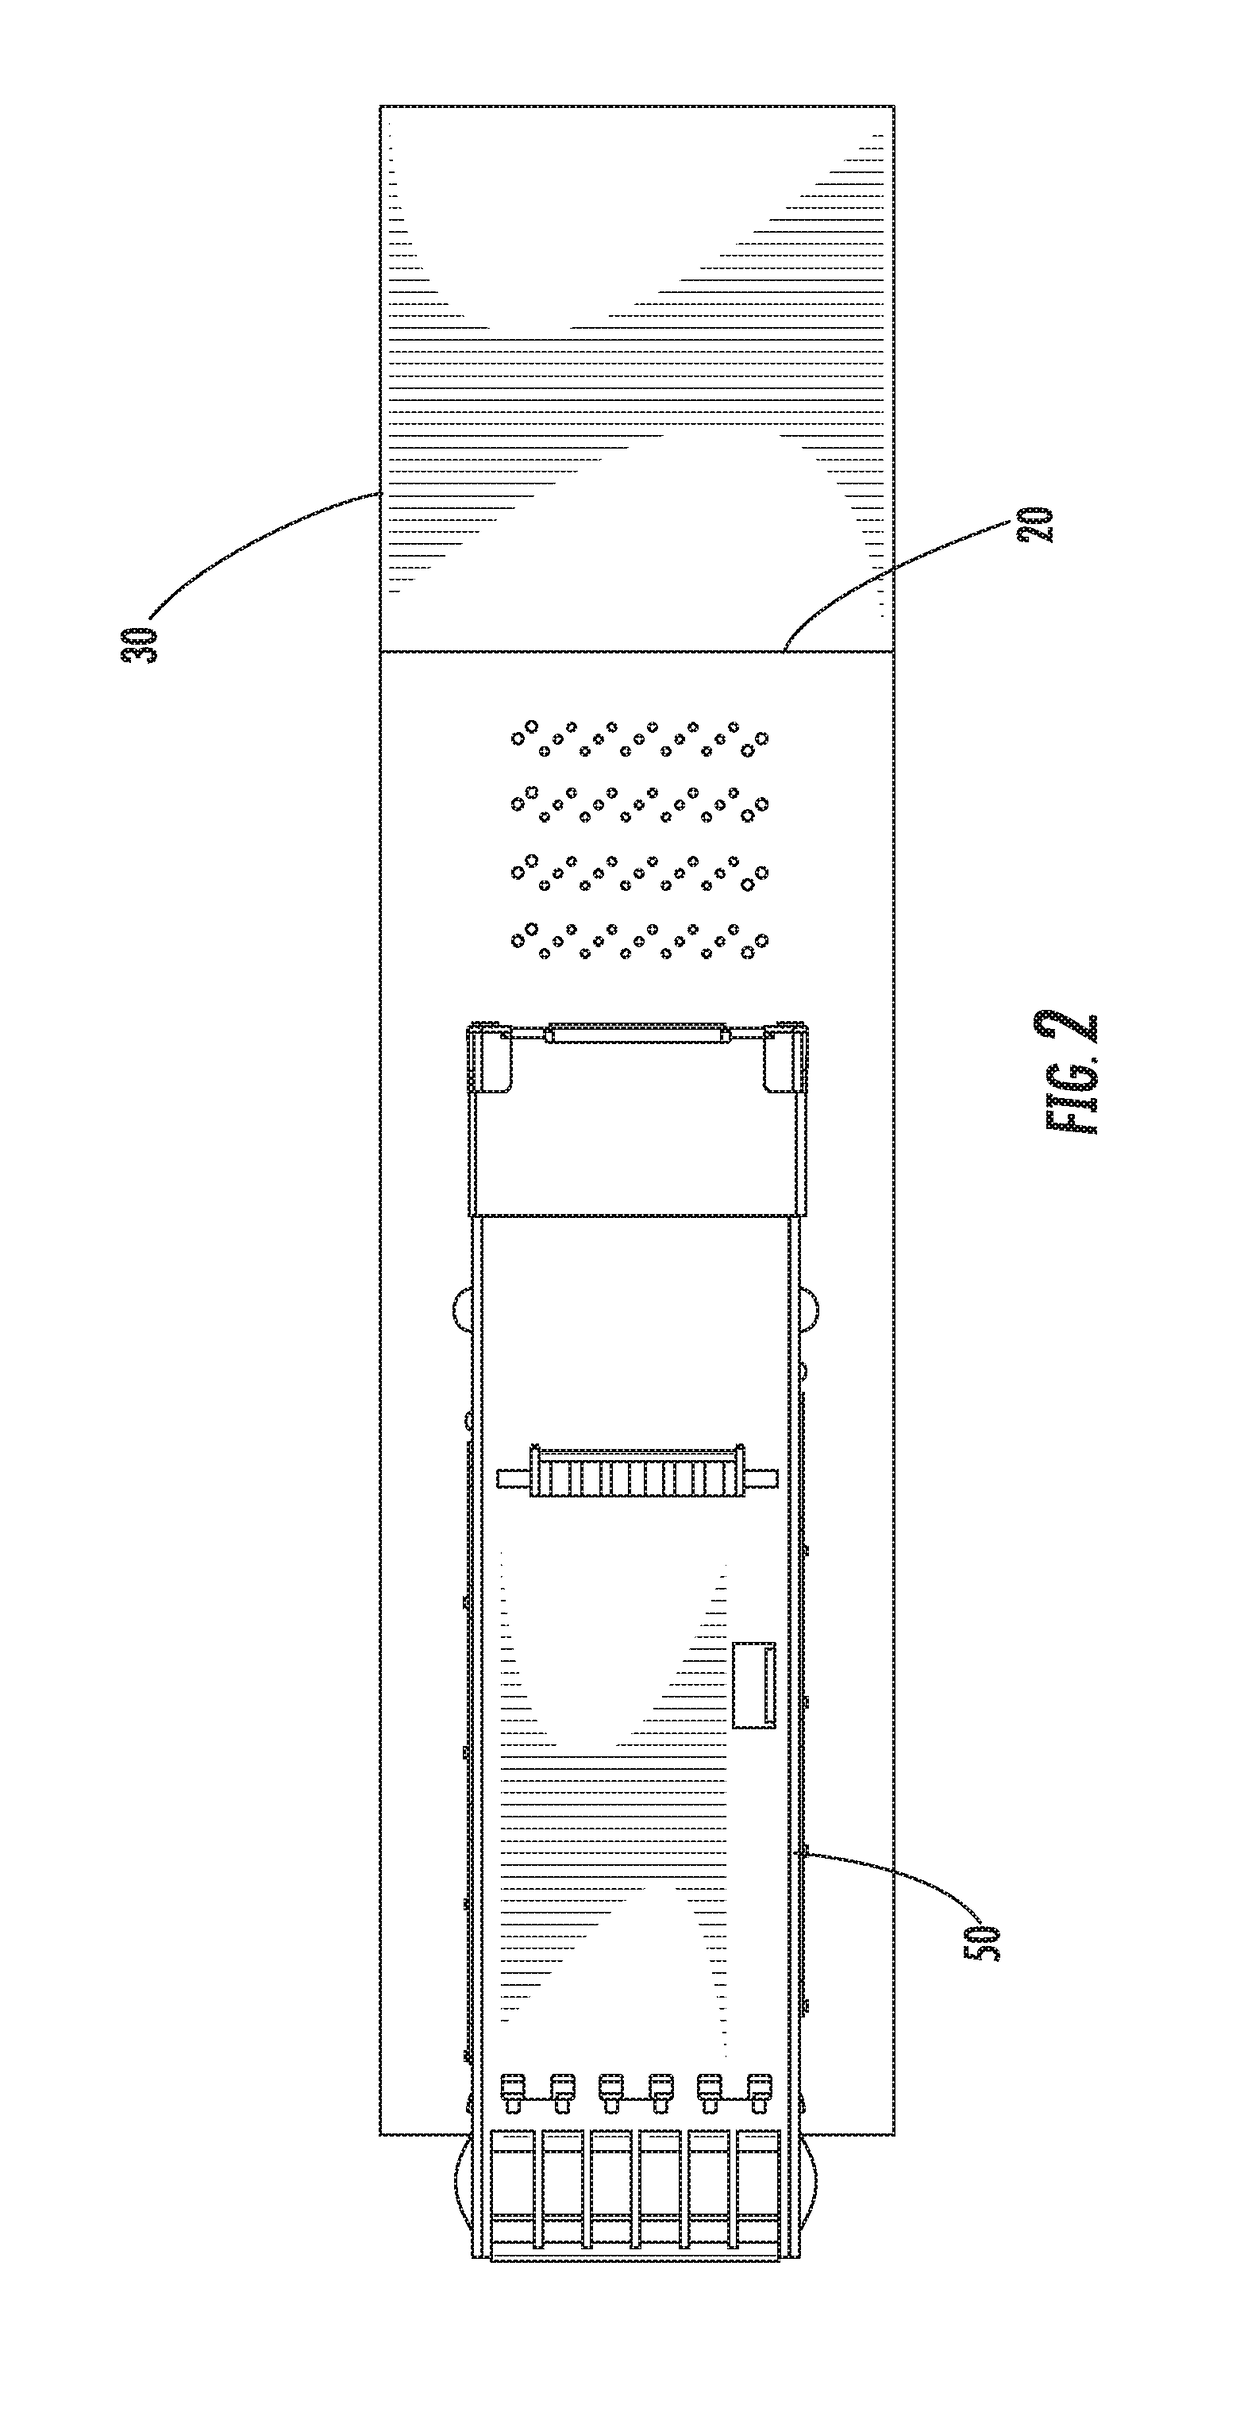 Connector system with adapter